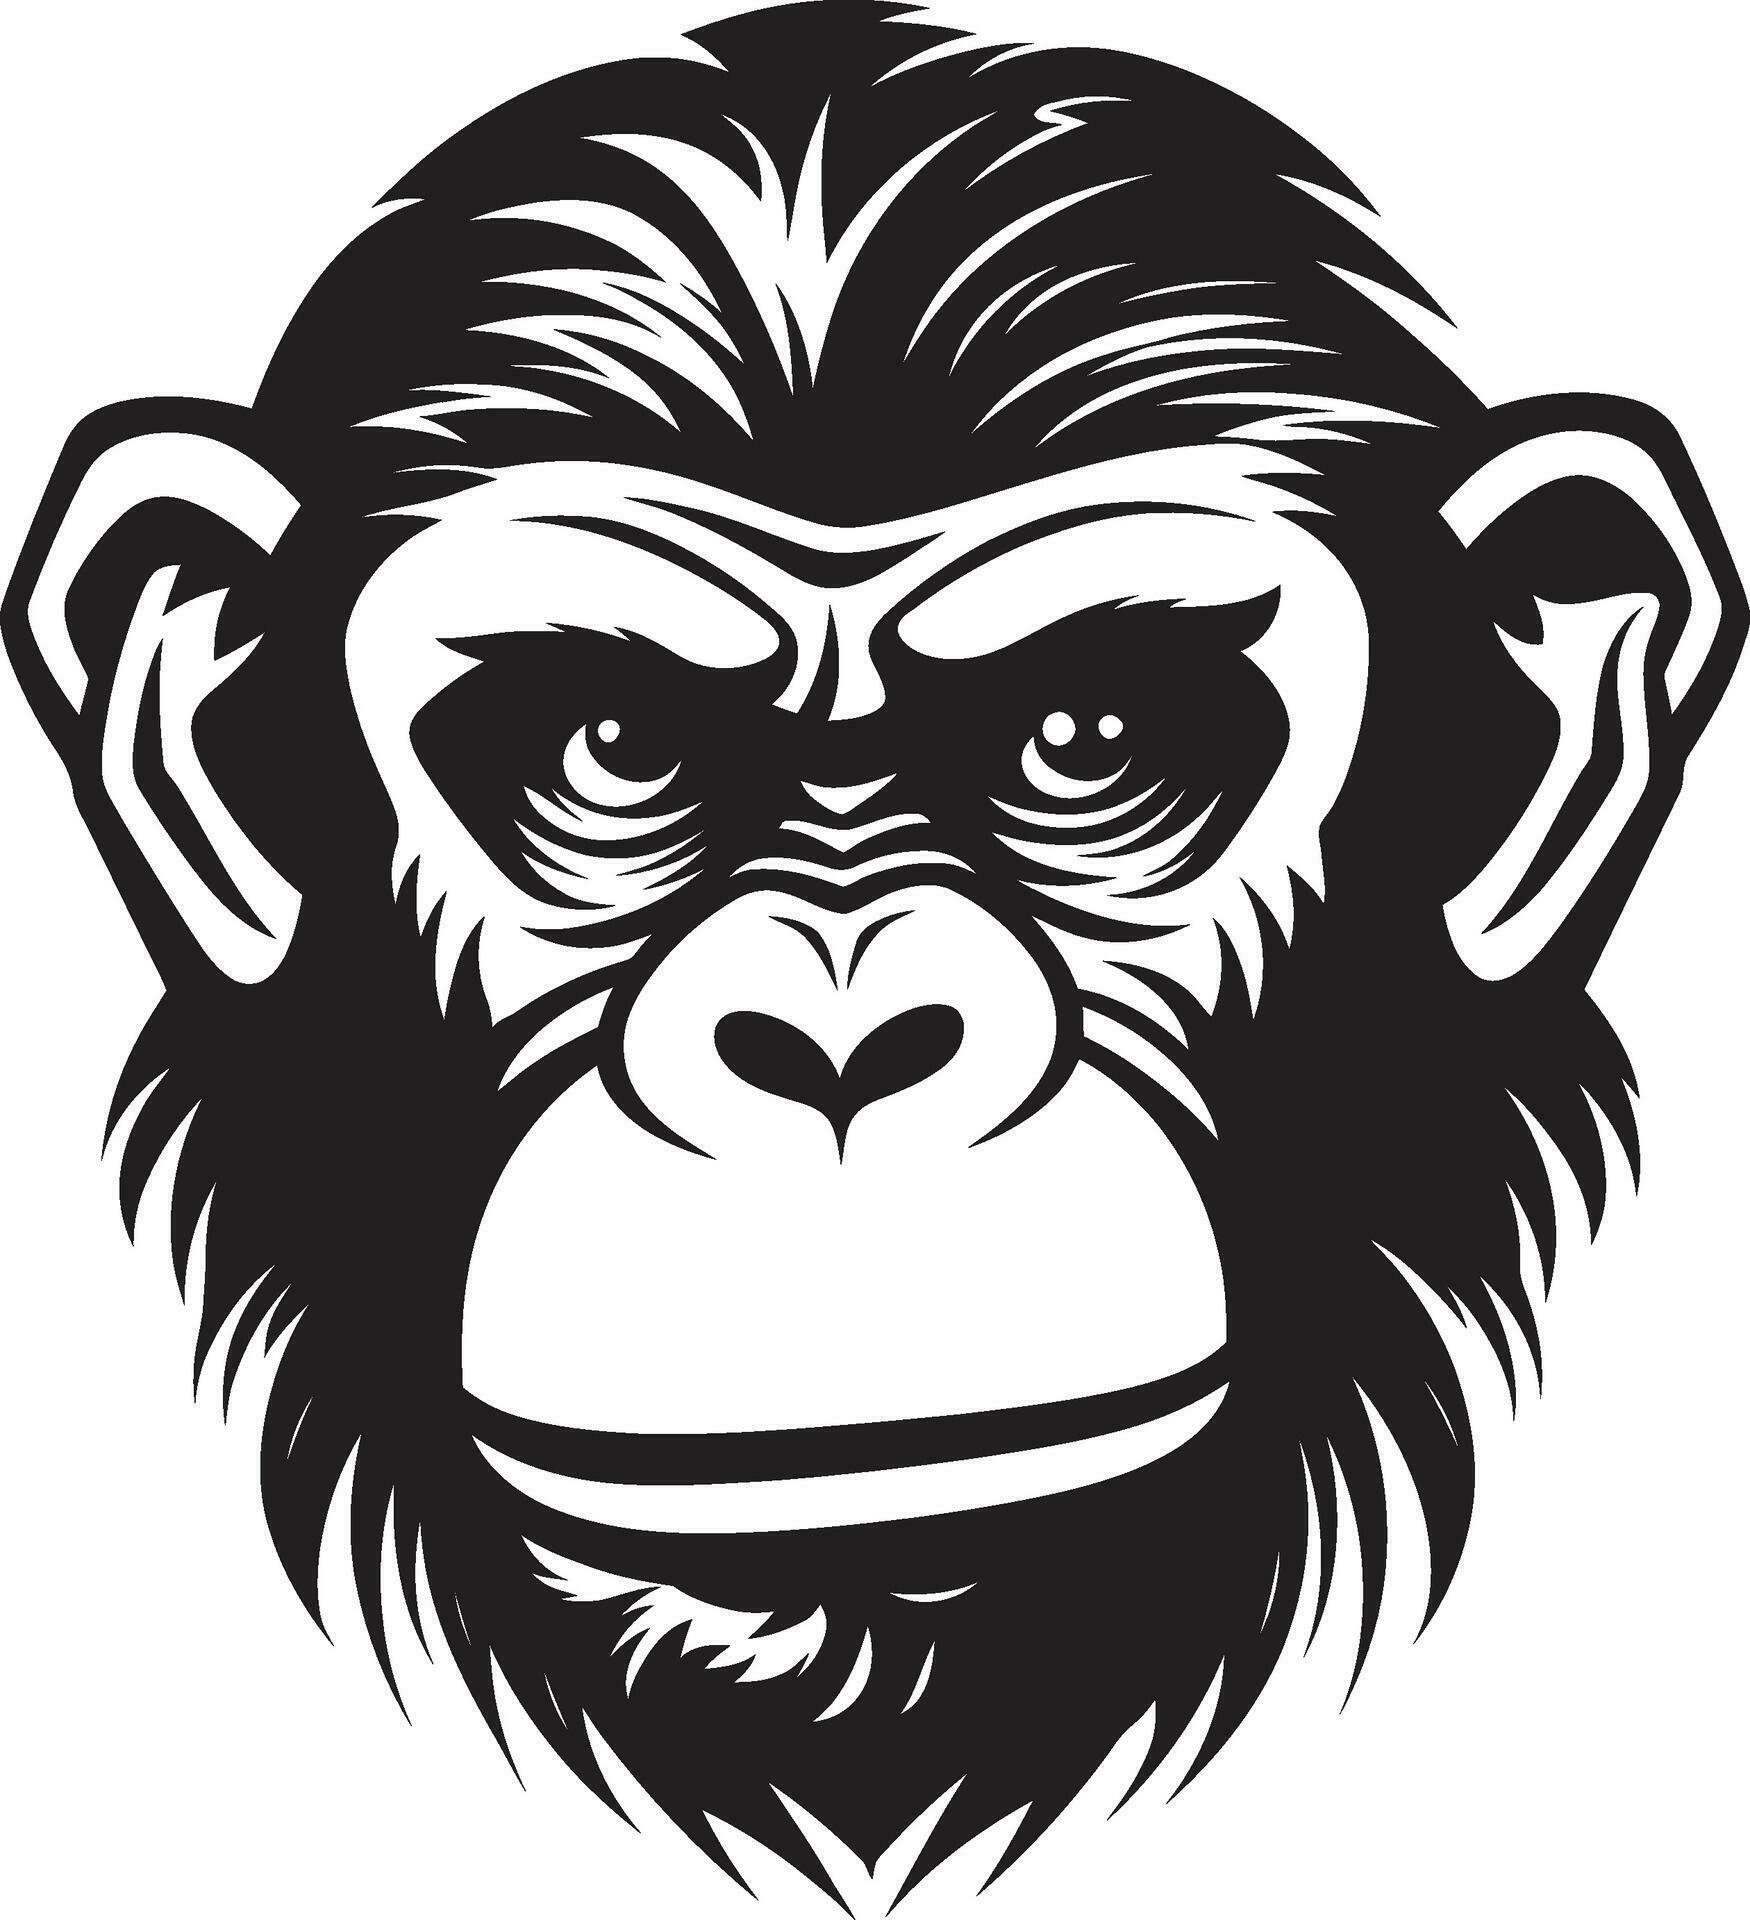 Majestic Ape Icon A Work of Natural Beauty Sculpted in Black Chimpanzee ...